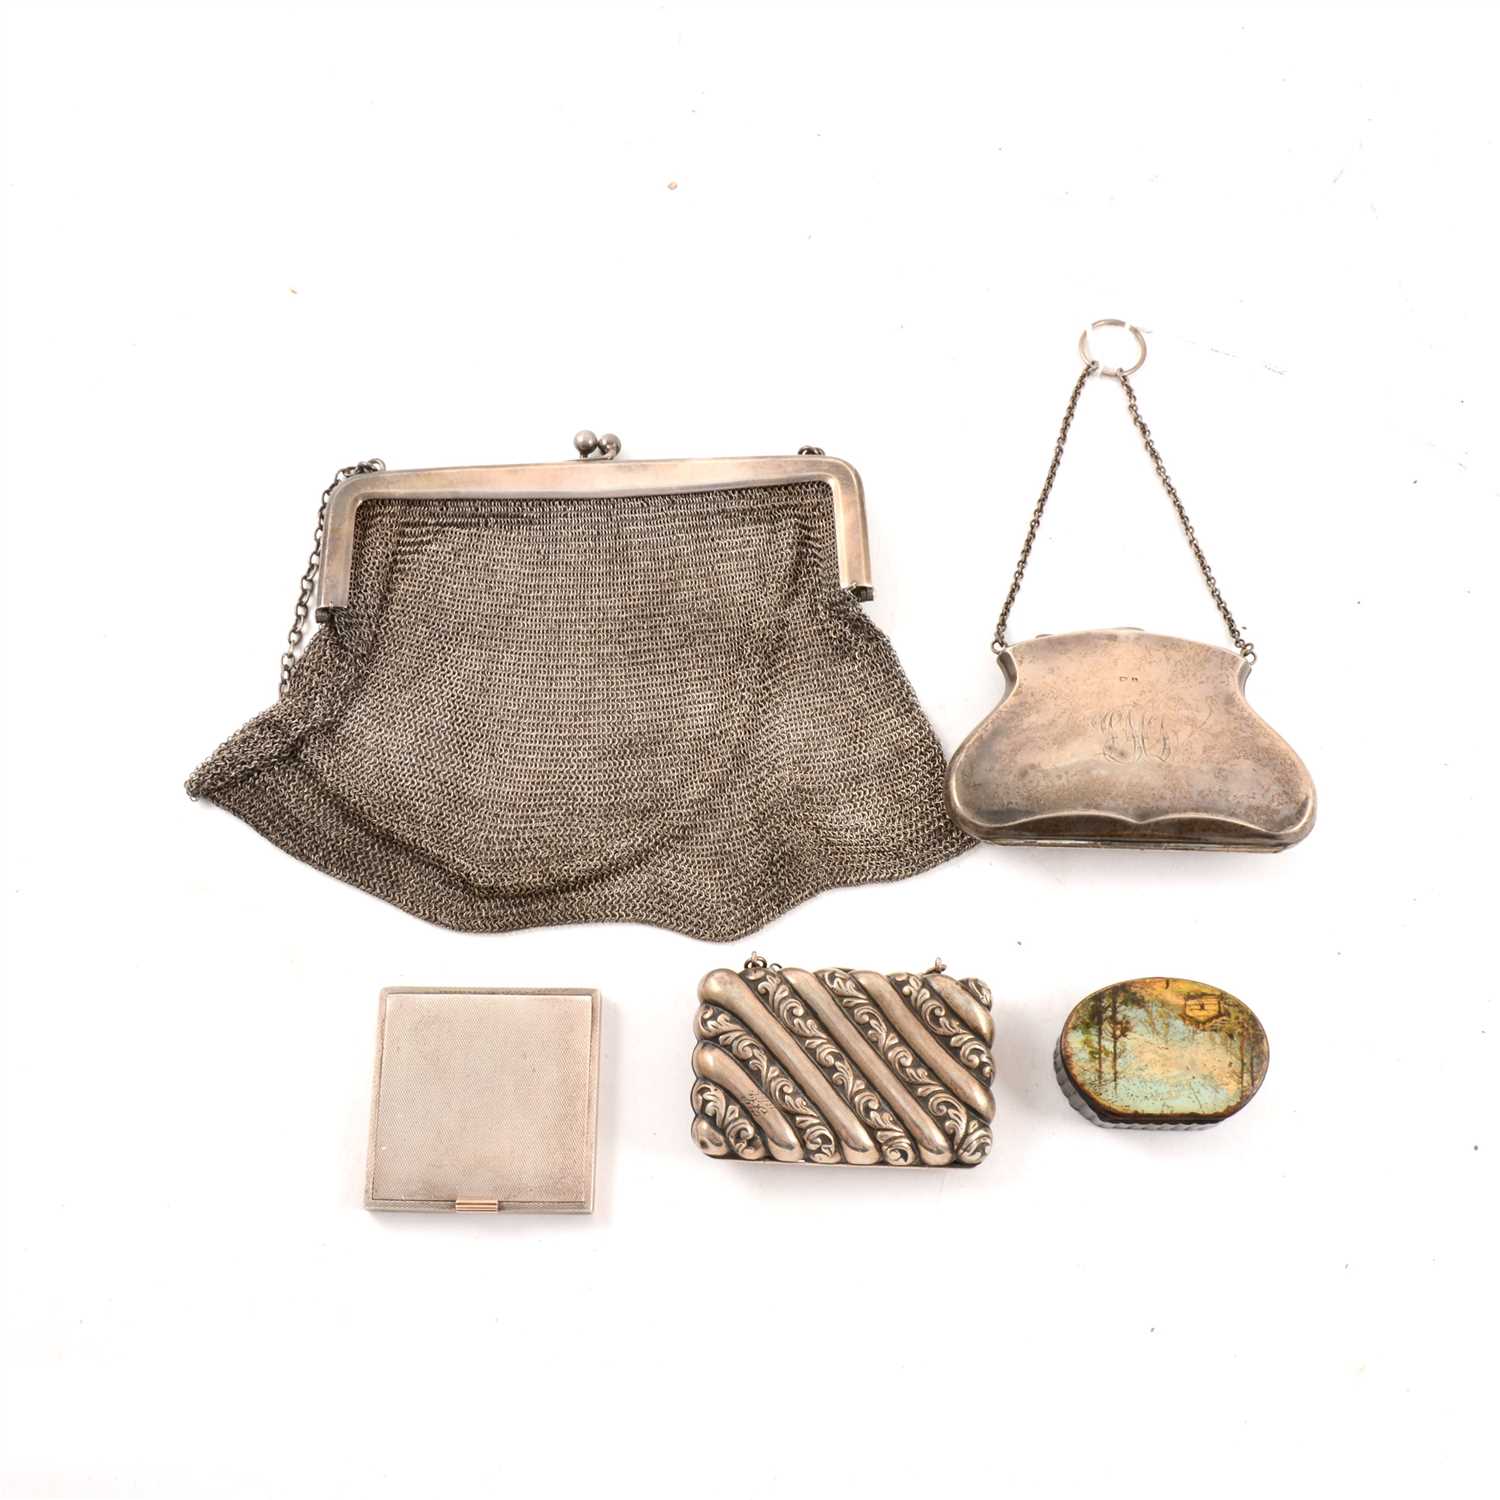 Lot 238 - A silver chain mail dance purse, import marks for London 1917, another purse in the shape of handbag, green material lining, maker's mark rubbed, Birmingham 1910, and another by James Deakin & Sons